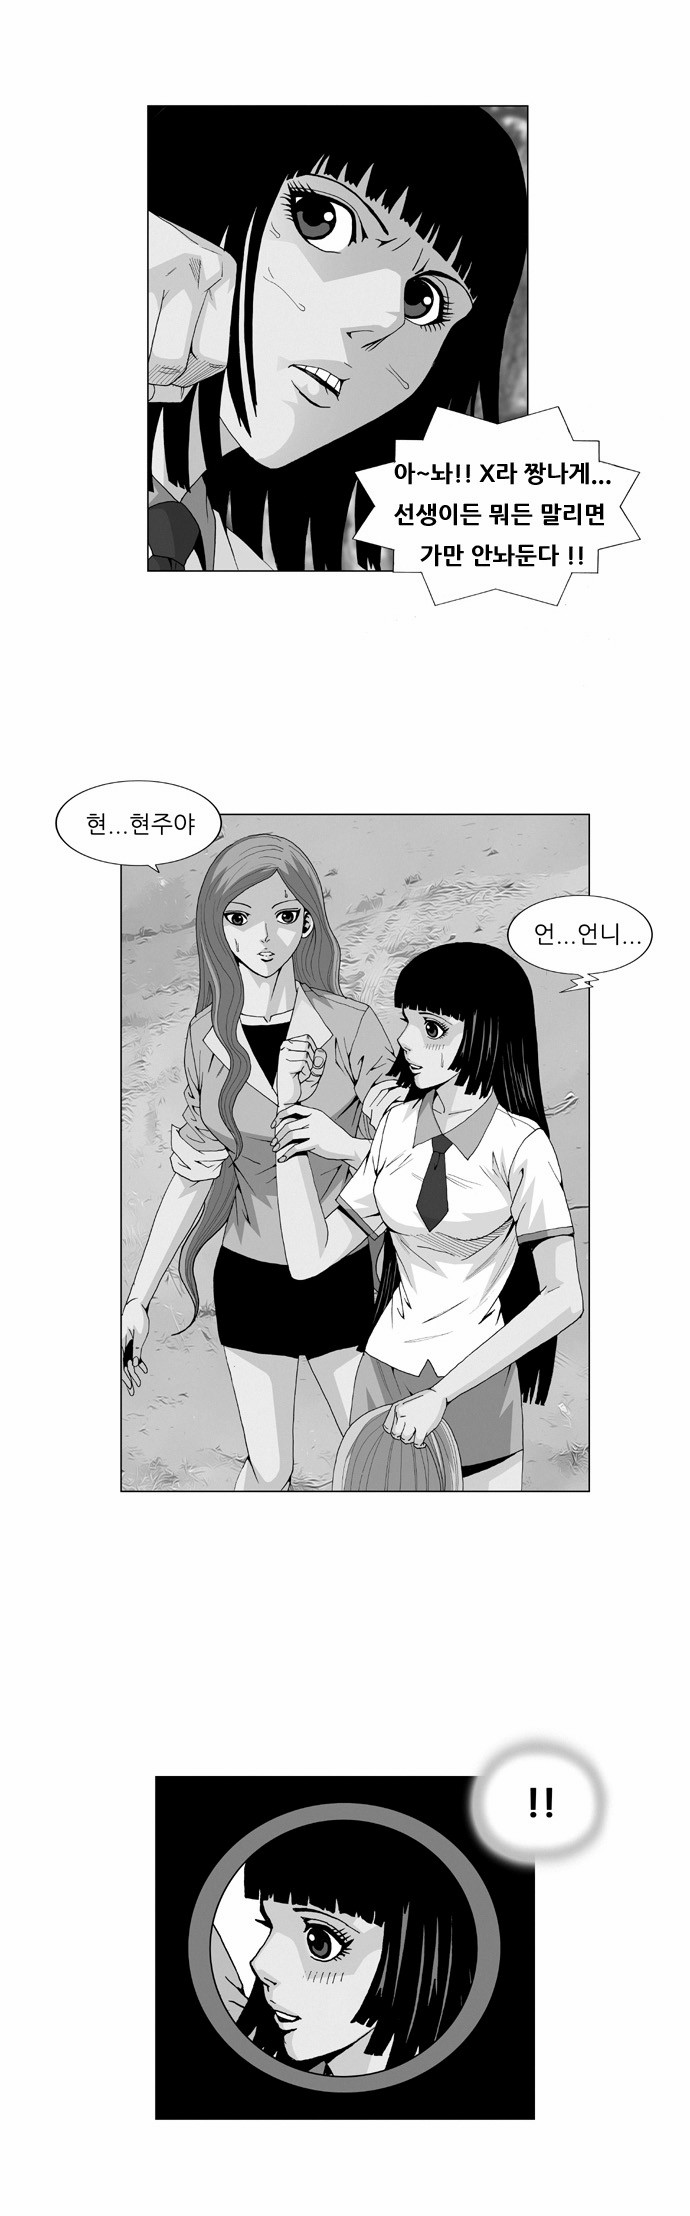 Ultimate Legend - Kang Hae Hyo - Chapter 35 - Page 1